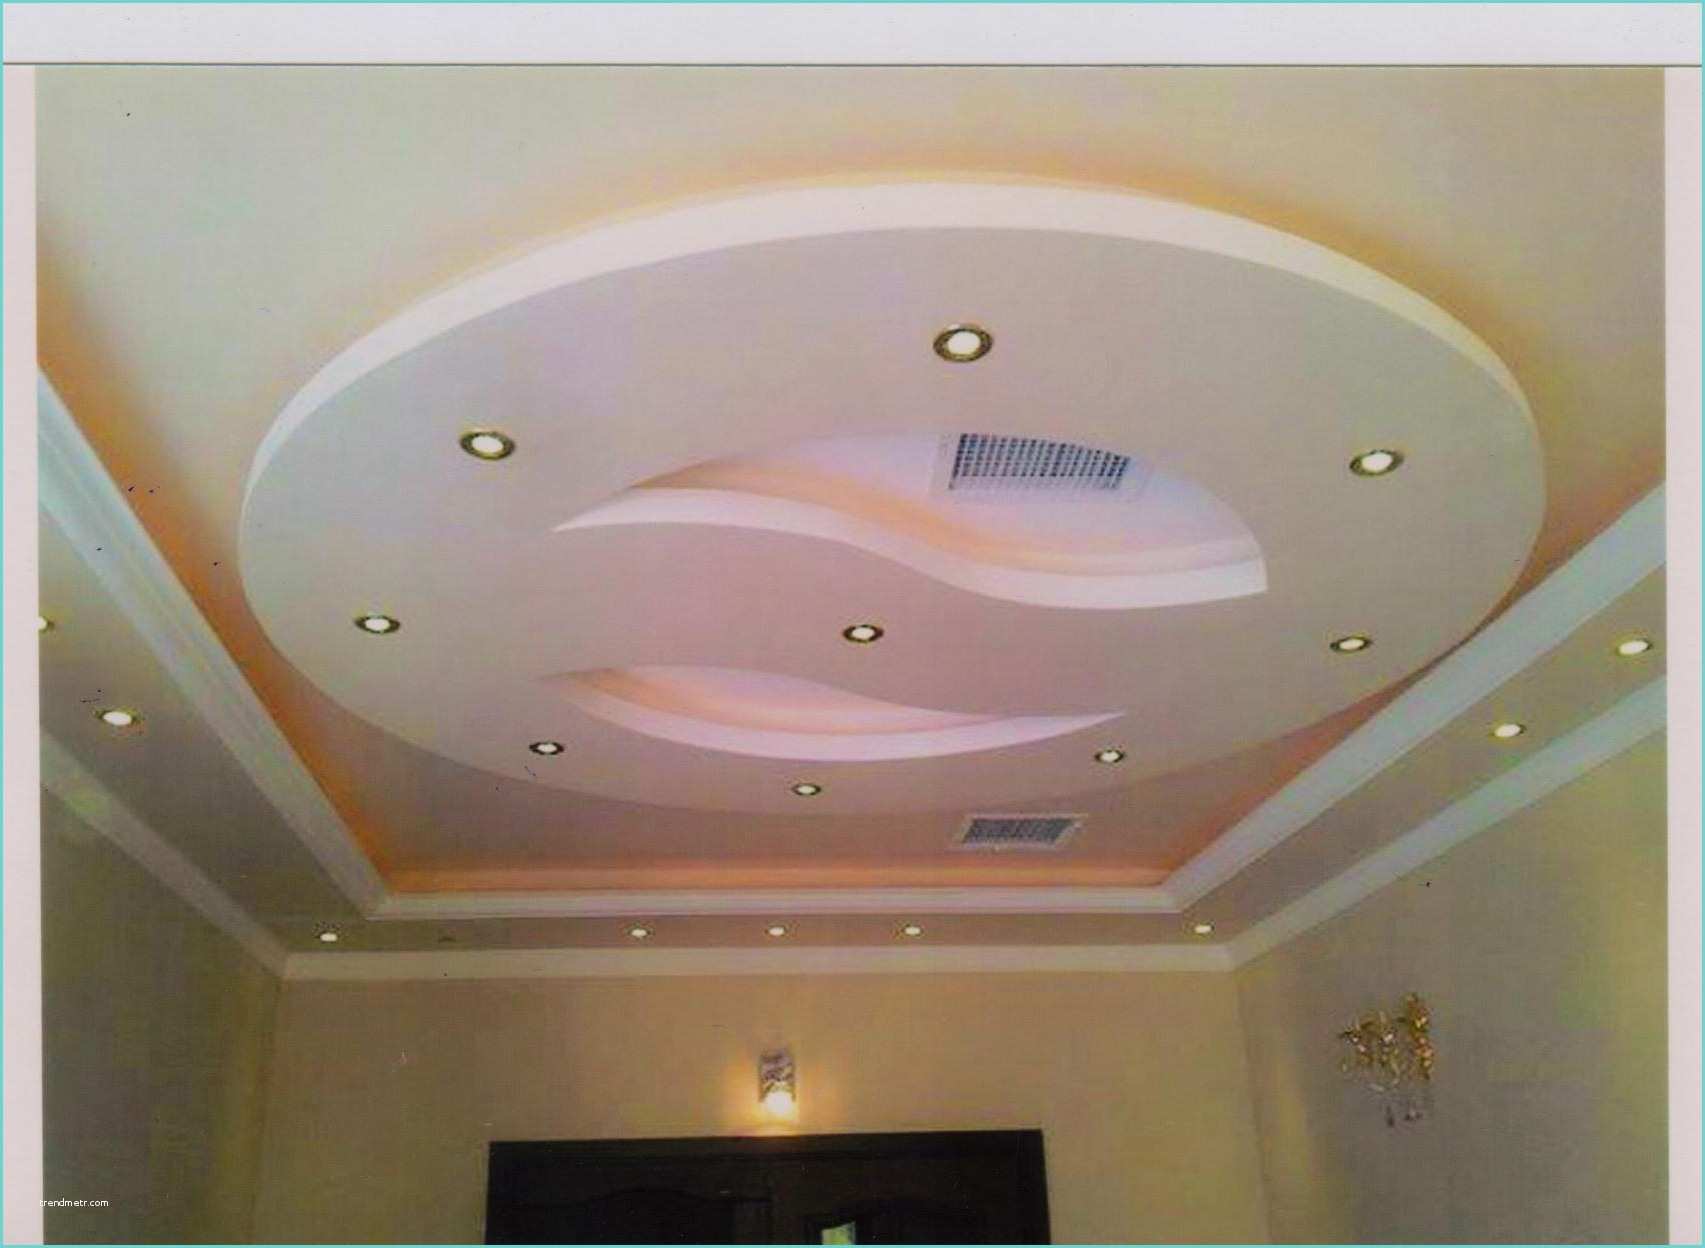 Pop Designs for Ceiling Residential Building Pop Designs for Ceiling Residential Building Home Bo